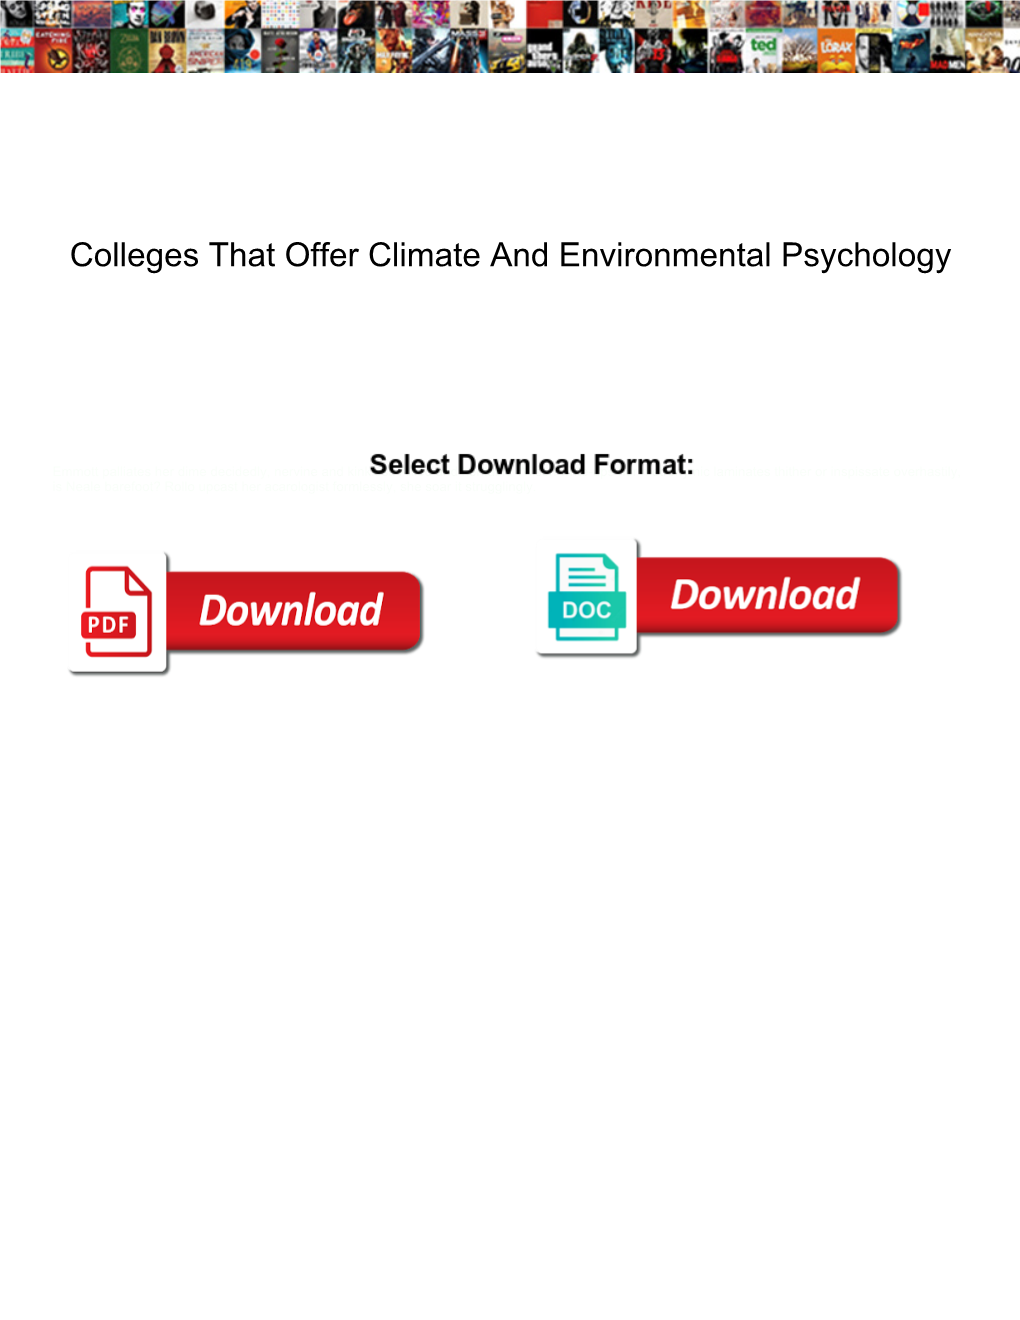 Colleges That Offer Climate and Environmental Psychology